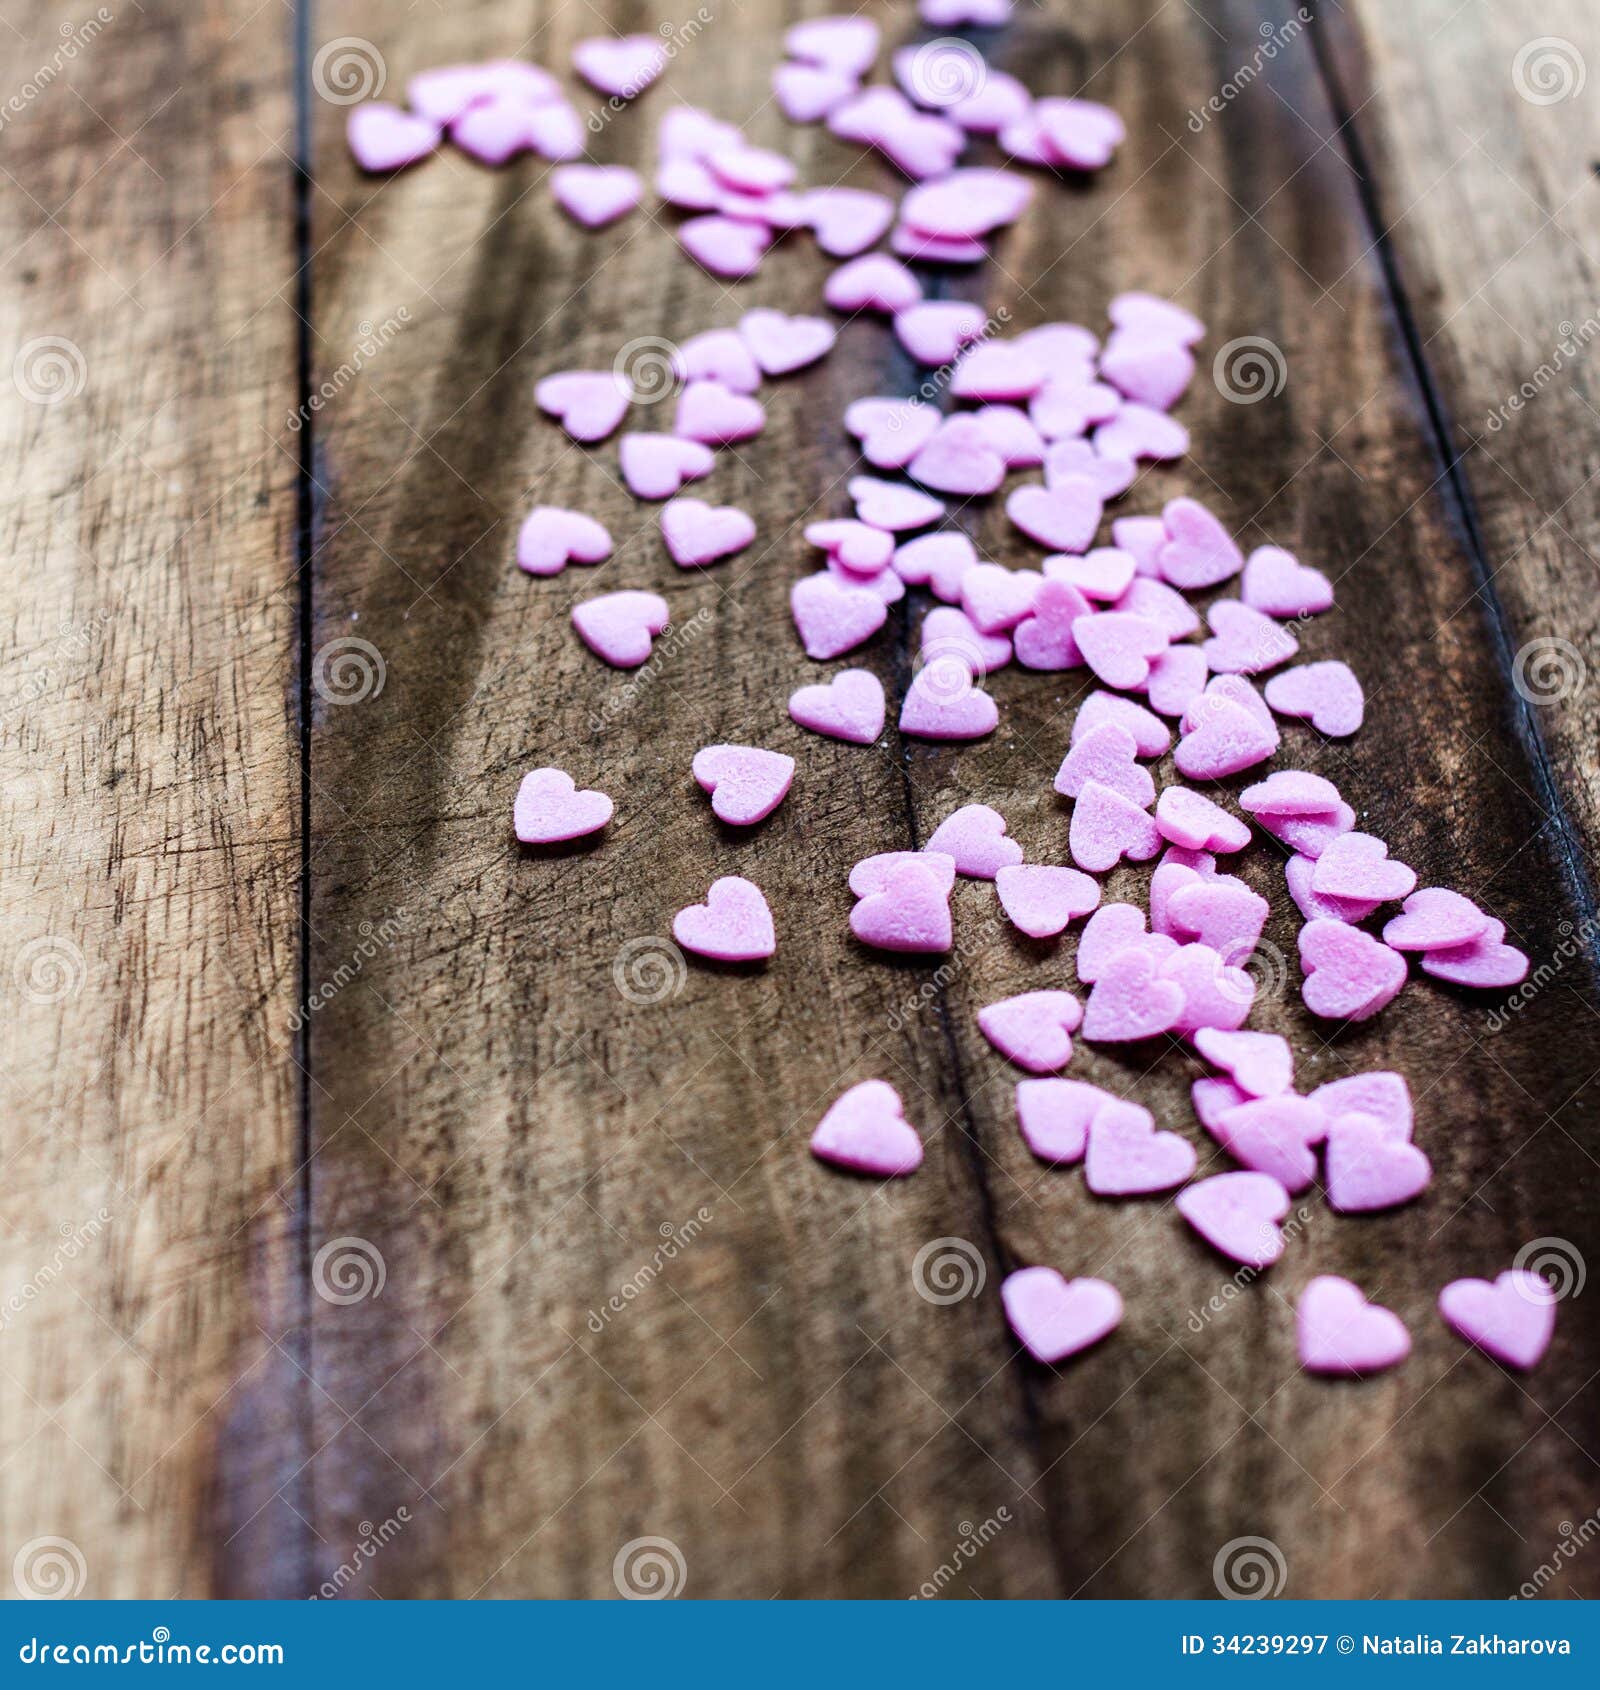 Valentines Day Background With Candy Hearts. Sugar Hearts ...